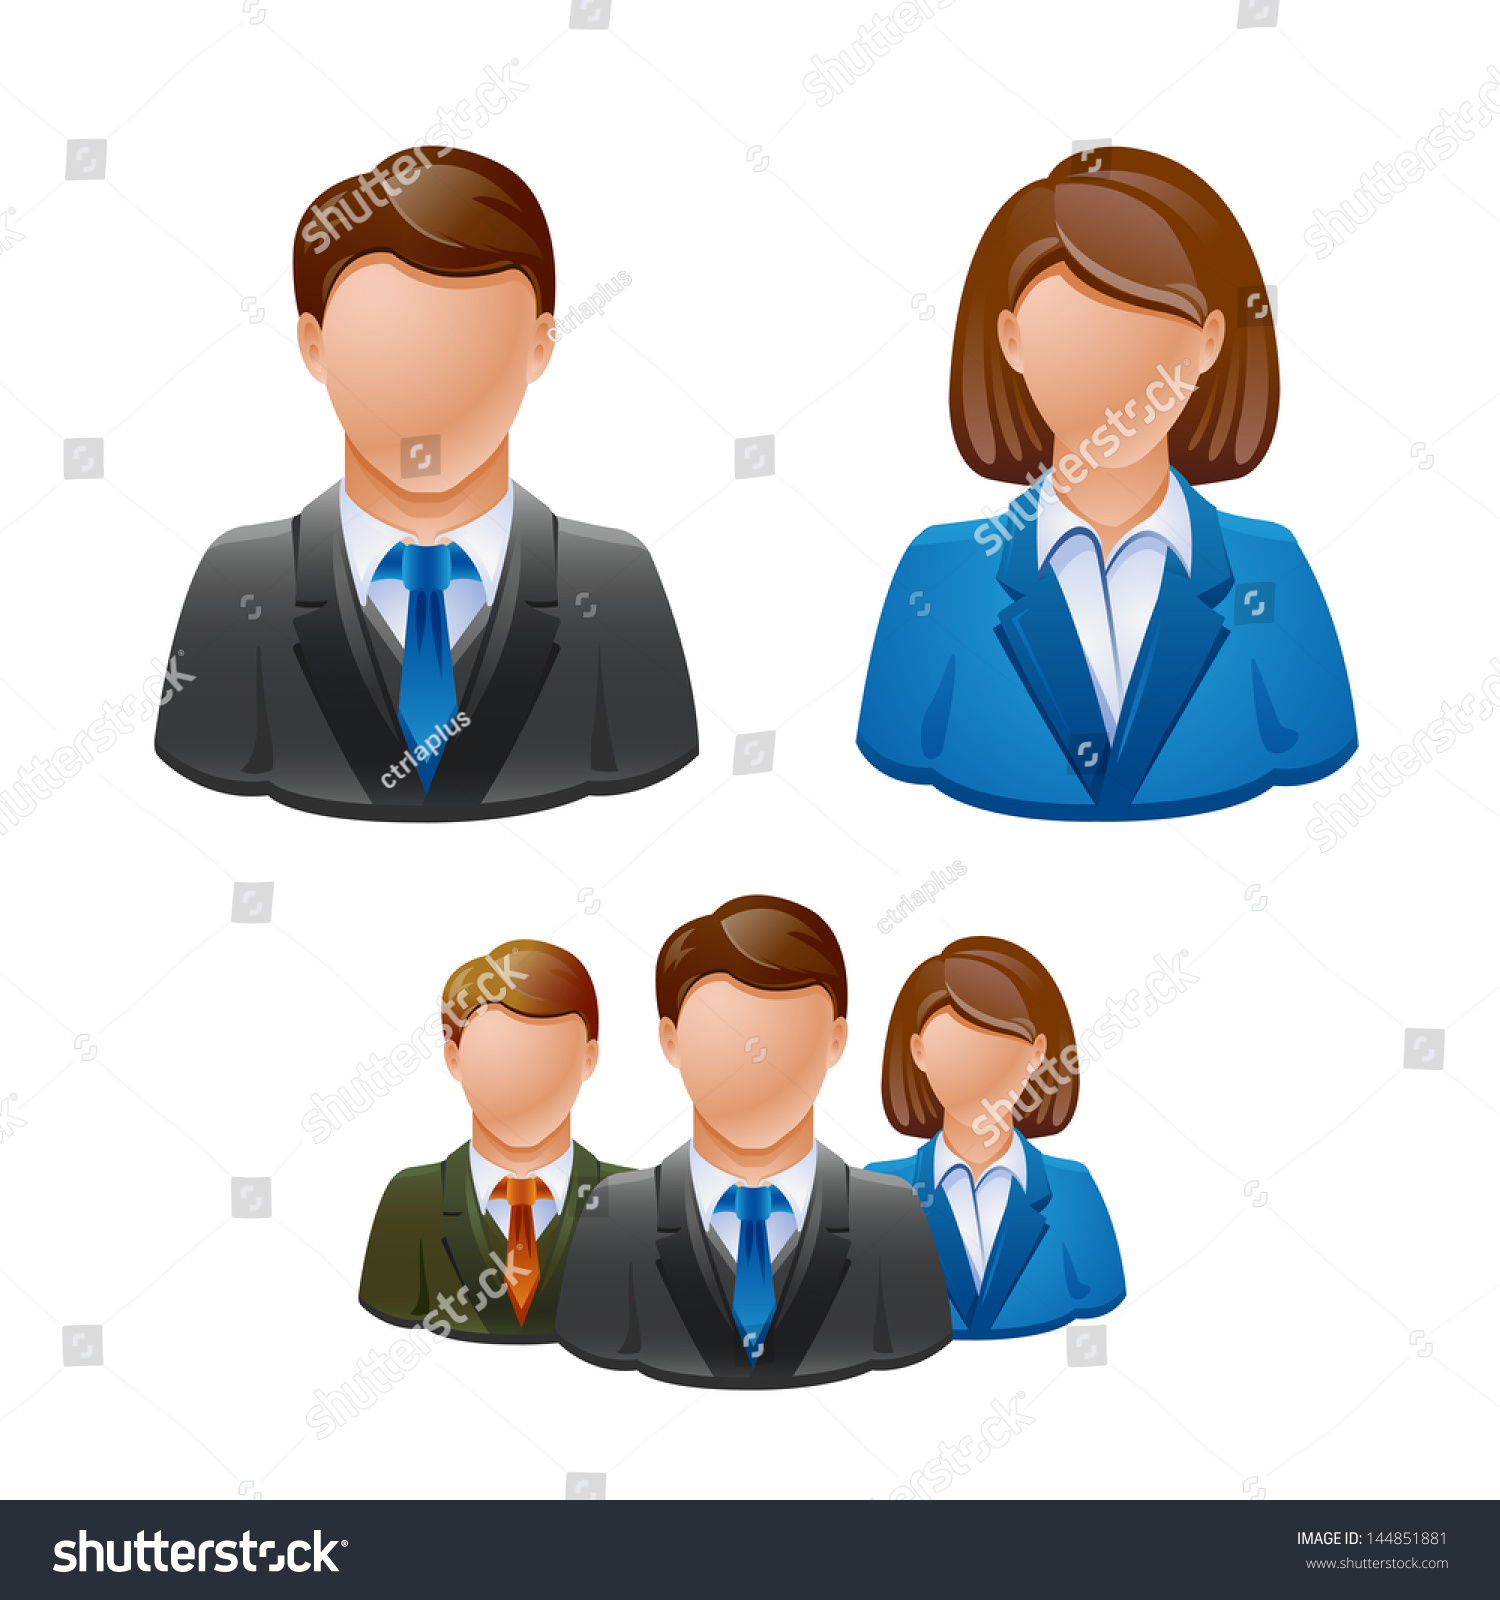 stock-vector-business-man-and-woman-icon-vector-illustration-144851881.jpg